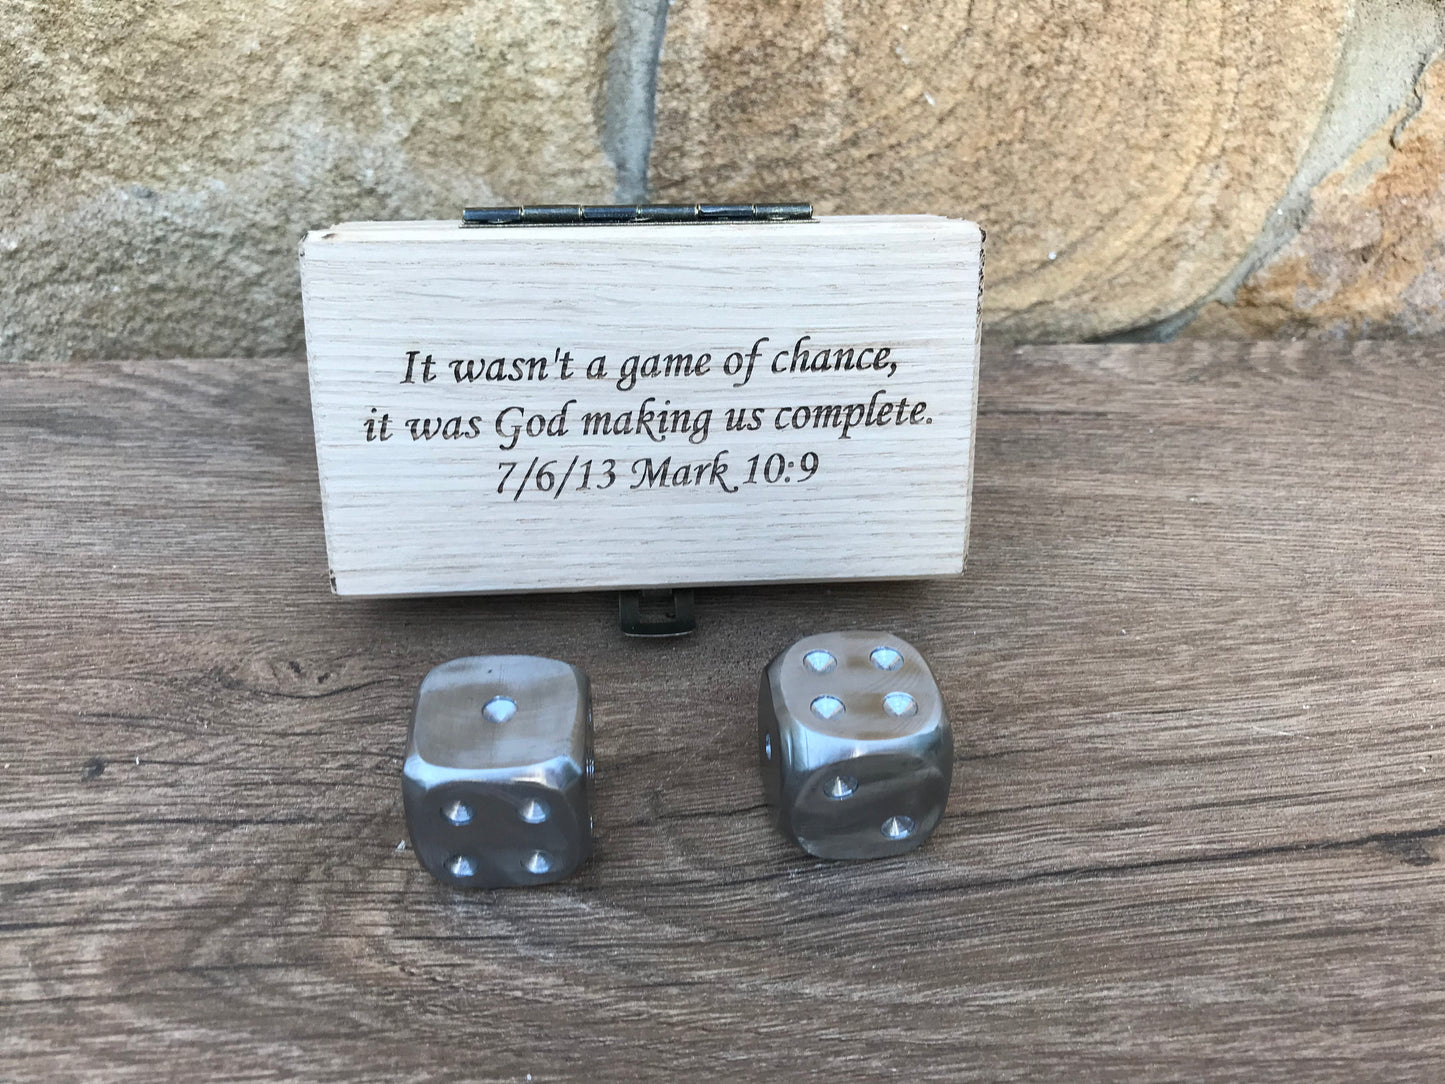 11th anniversary, steel anniversary, stainless steel dices, steel dices, steel gift, steel anniversary gift, dice,tabletop games,gaming gift